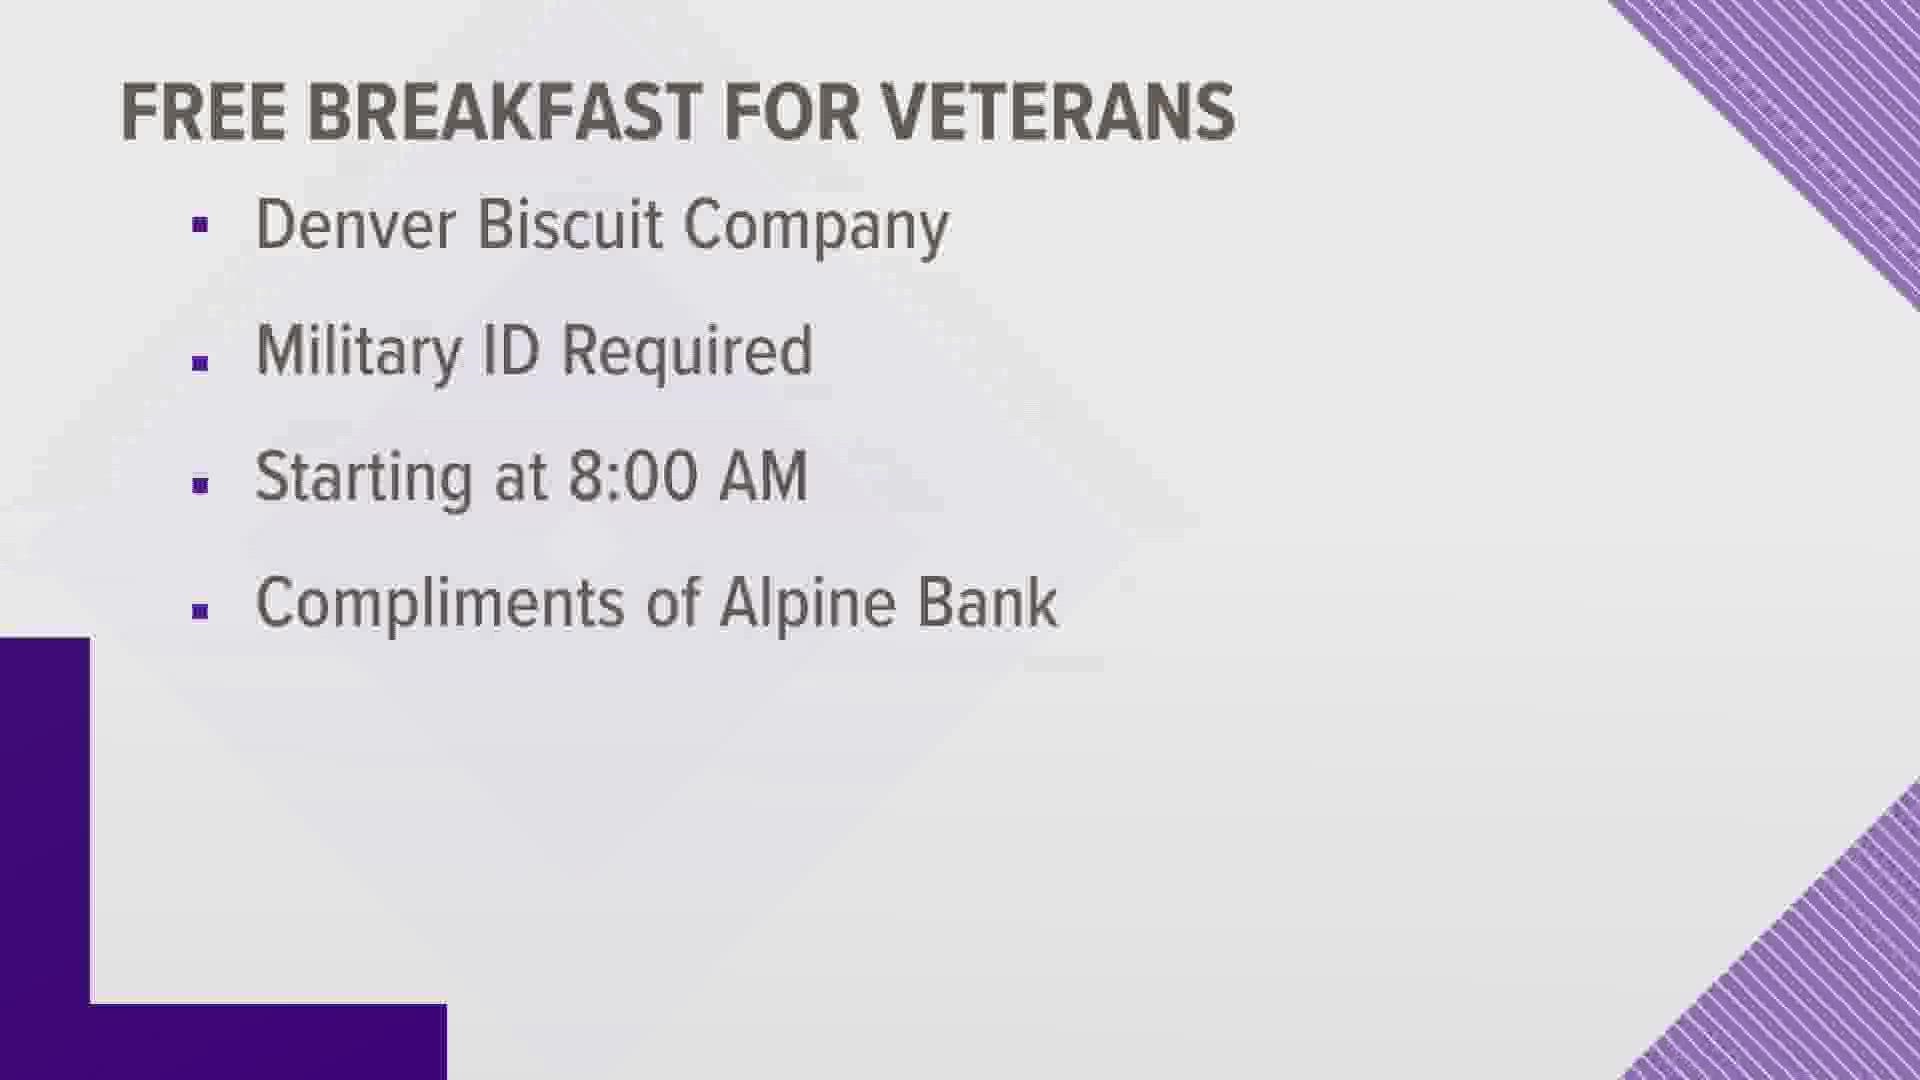 Here is a list of locations offering deals for veterans and active-duty military members Friday, Nov. 11.